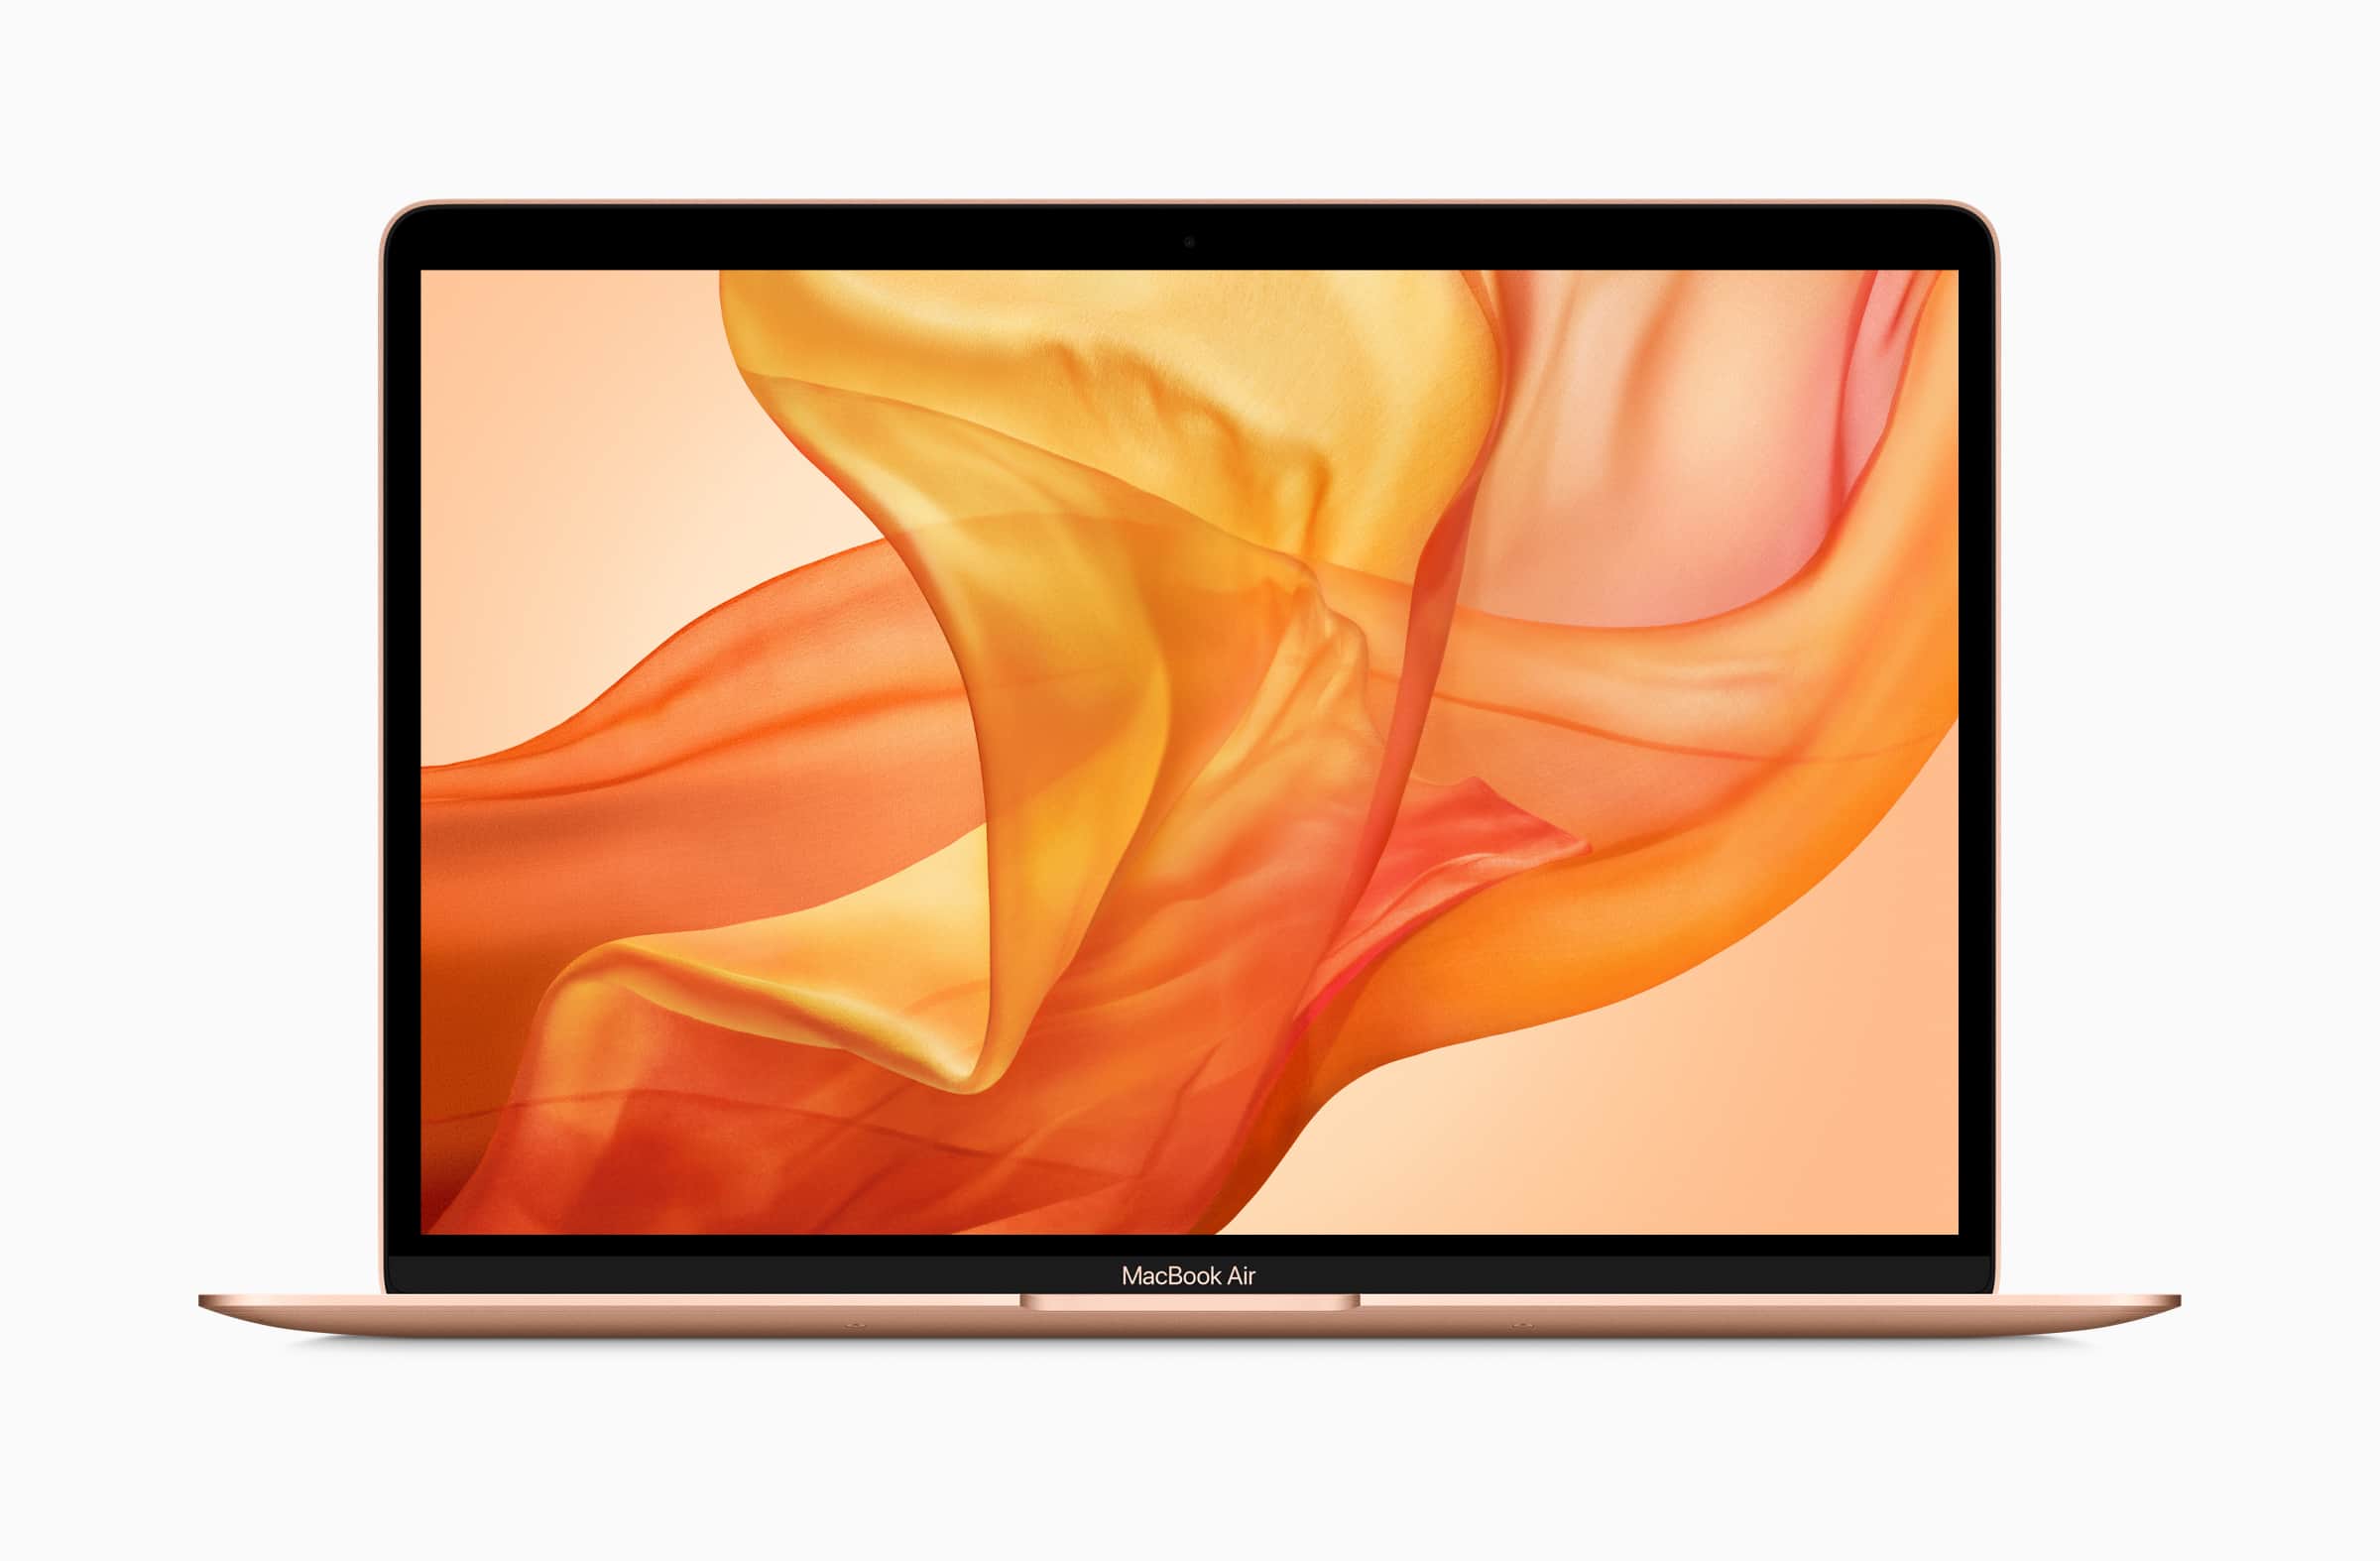 The new 2018 MacBook Air is simply stunning